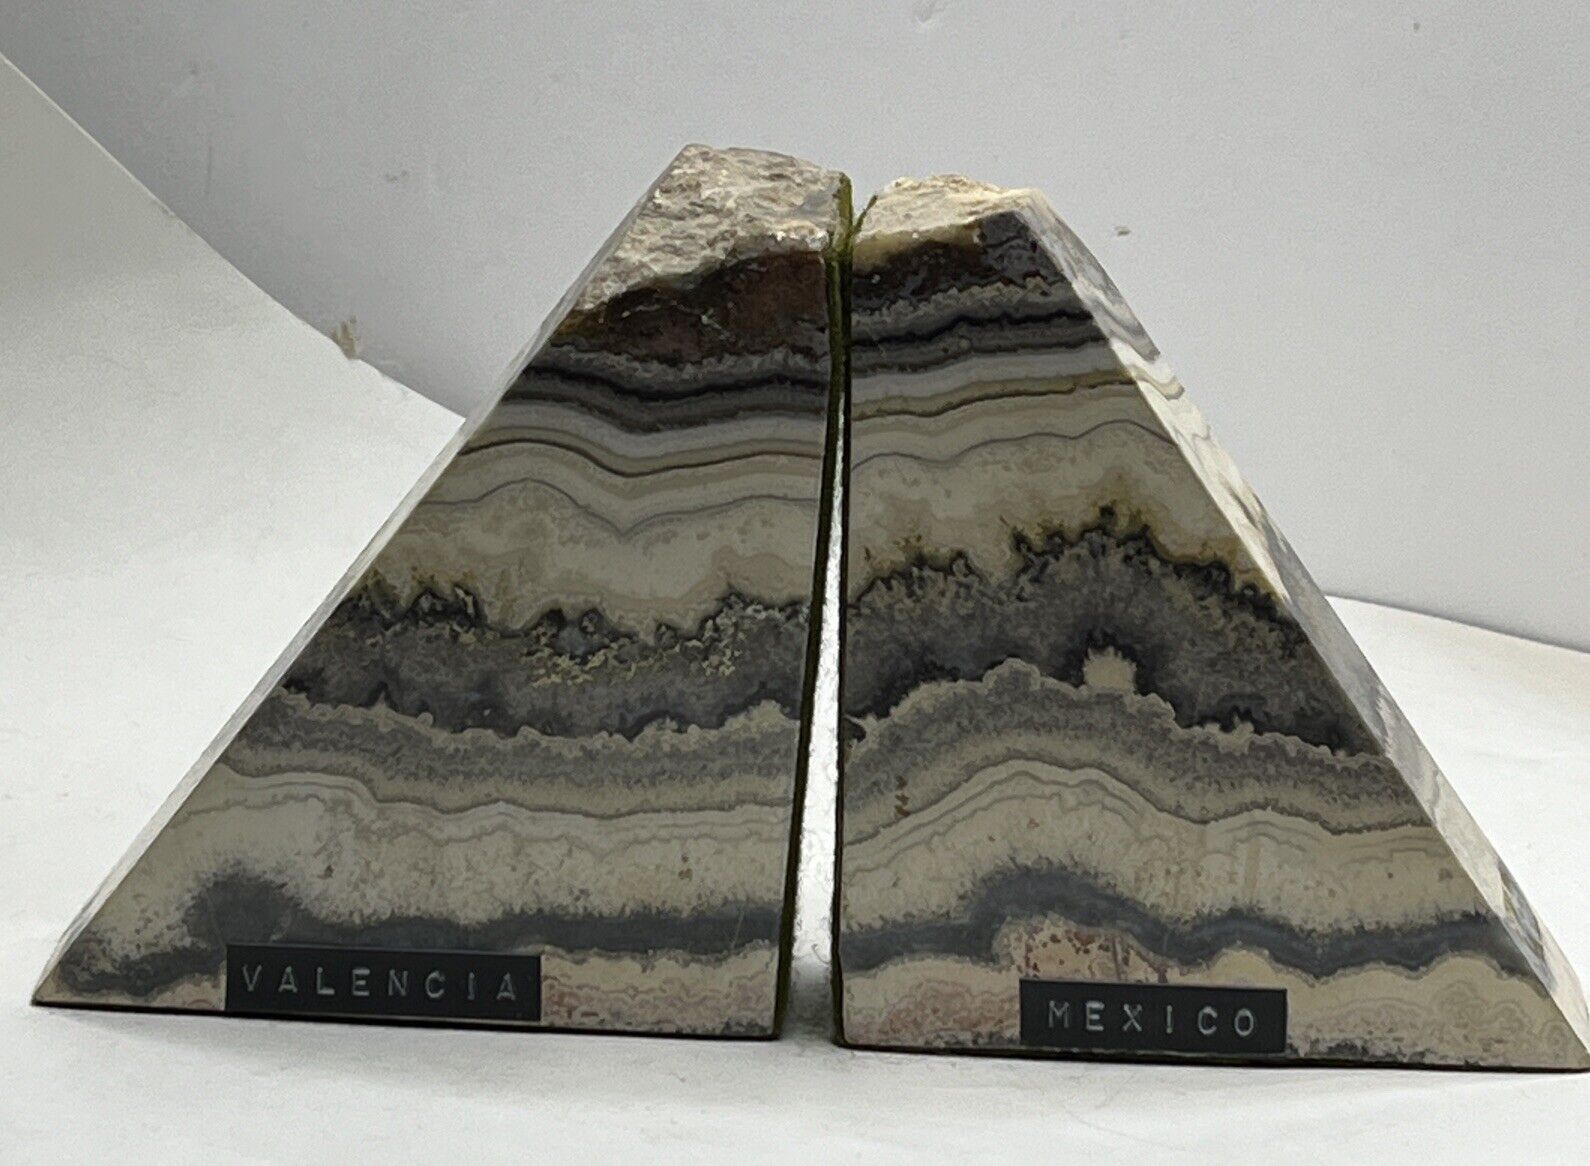 Vintage Pair of Marble Bookends Valencia Mexico Wedge Geometric Shape Heavy